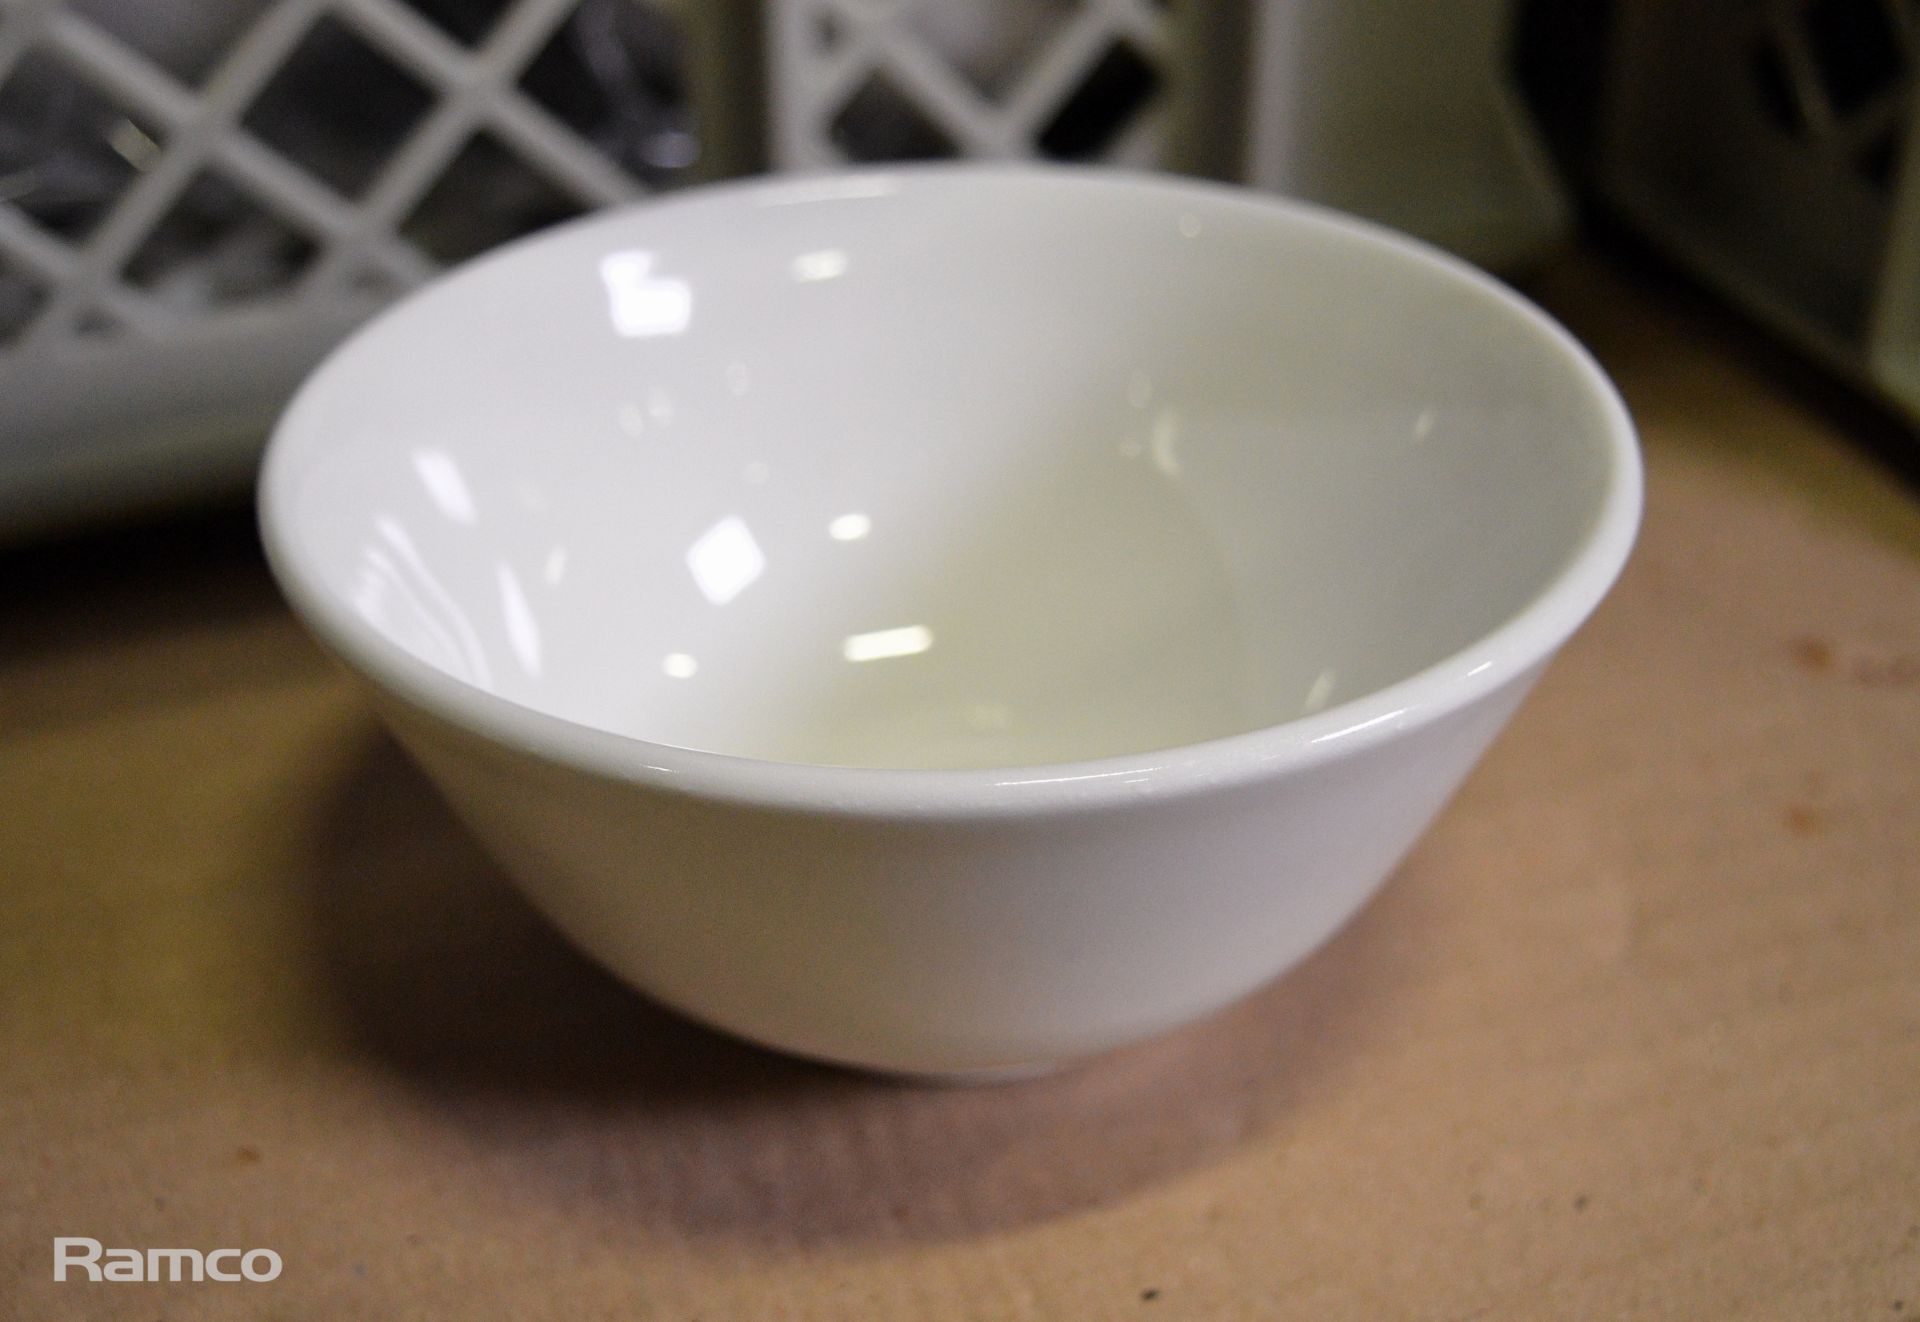 Small ceramic bowls - 12cm diameter - approx 50 per tray - 6 trays - Image 2 of 3